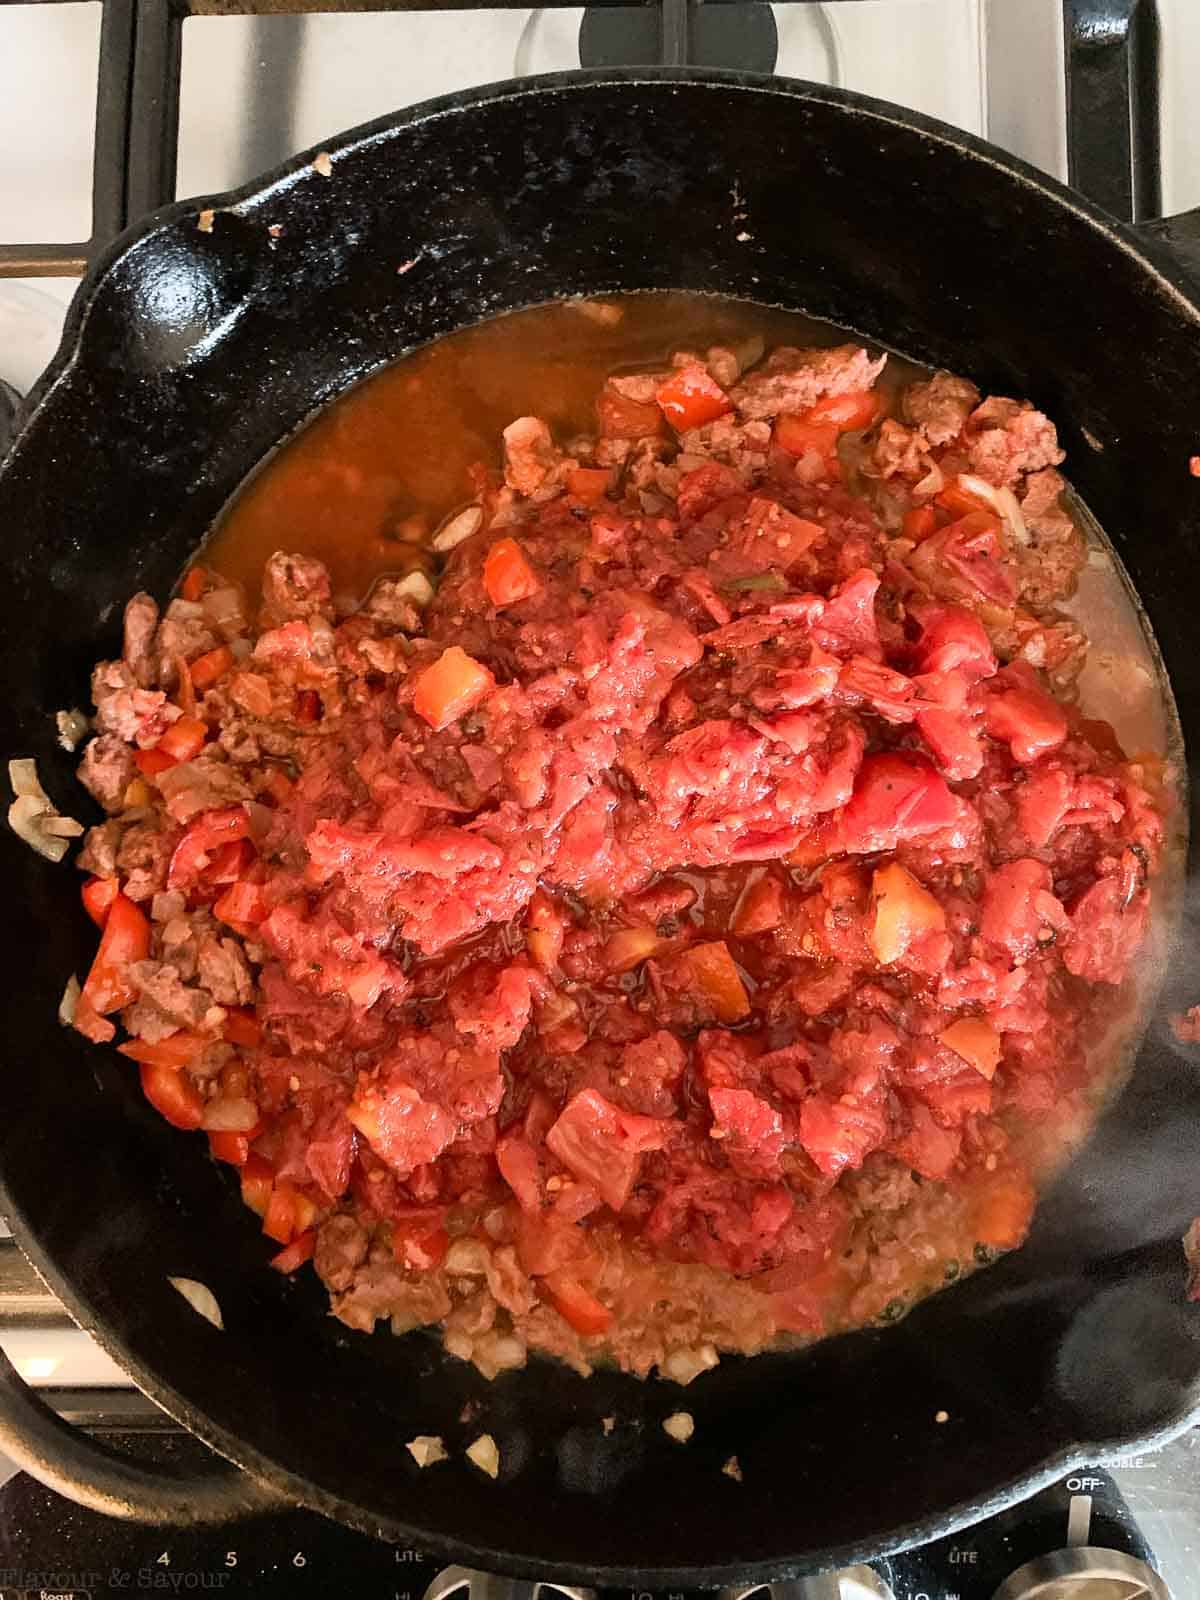 tomatoes added to onions, garlic and plant-based meat in a skillet.